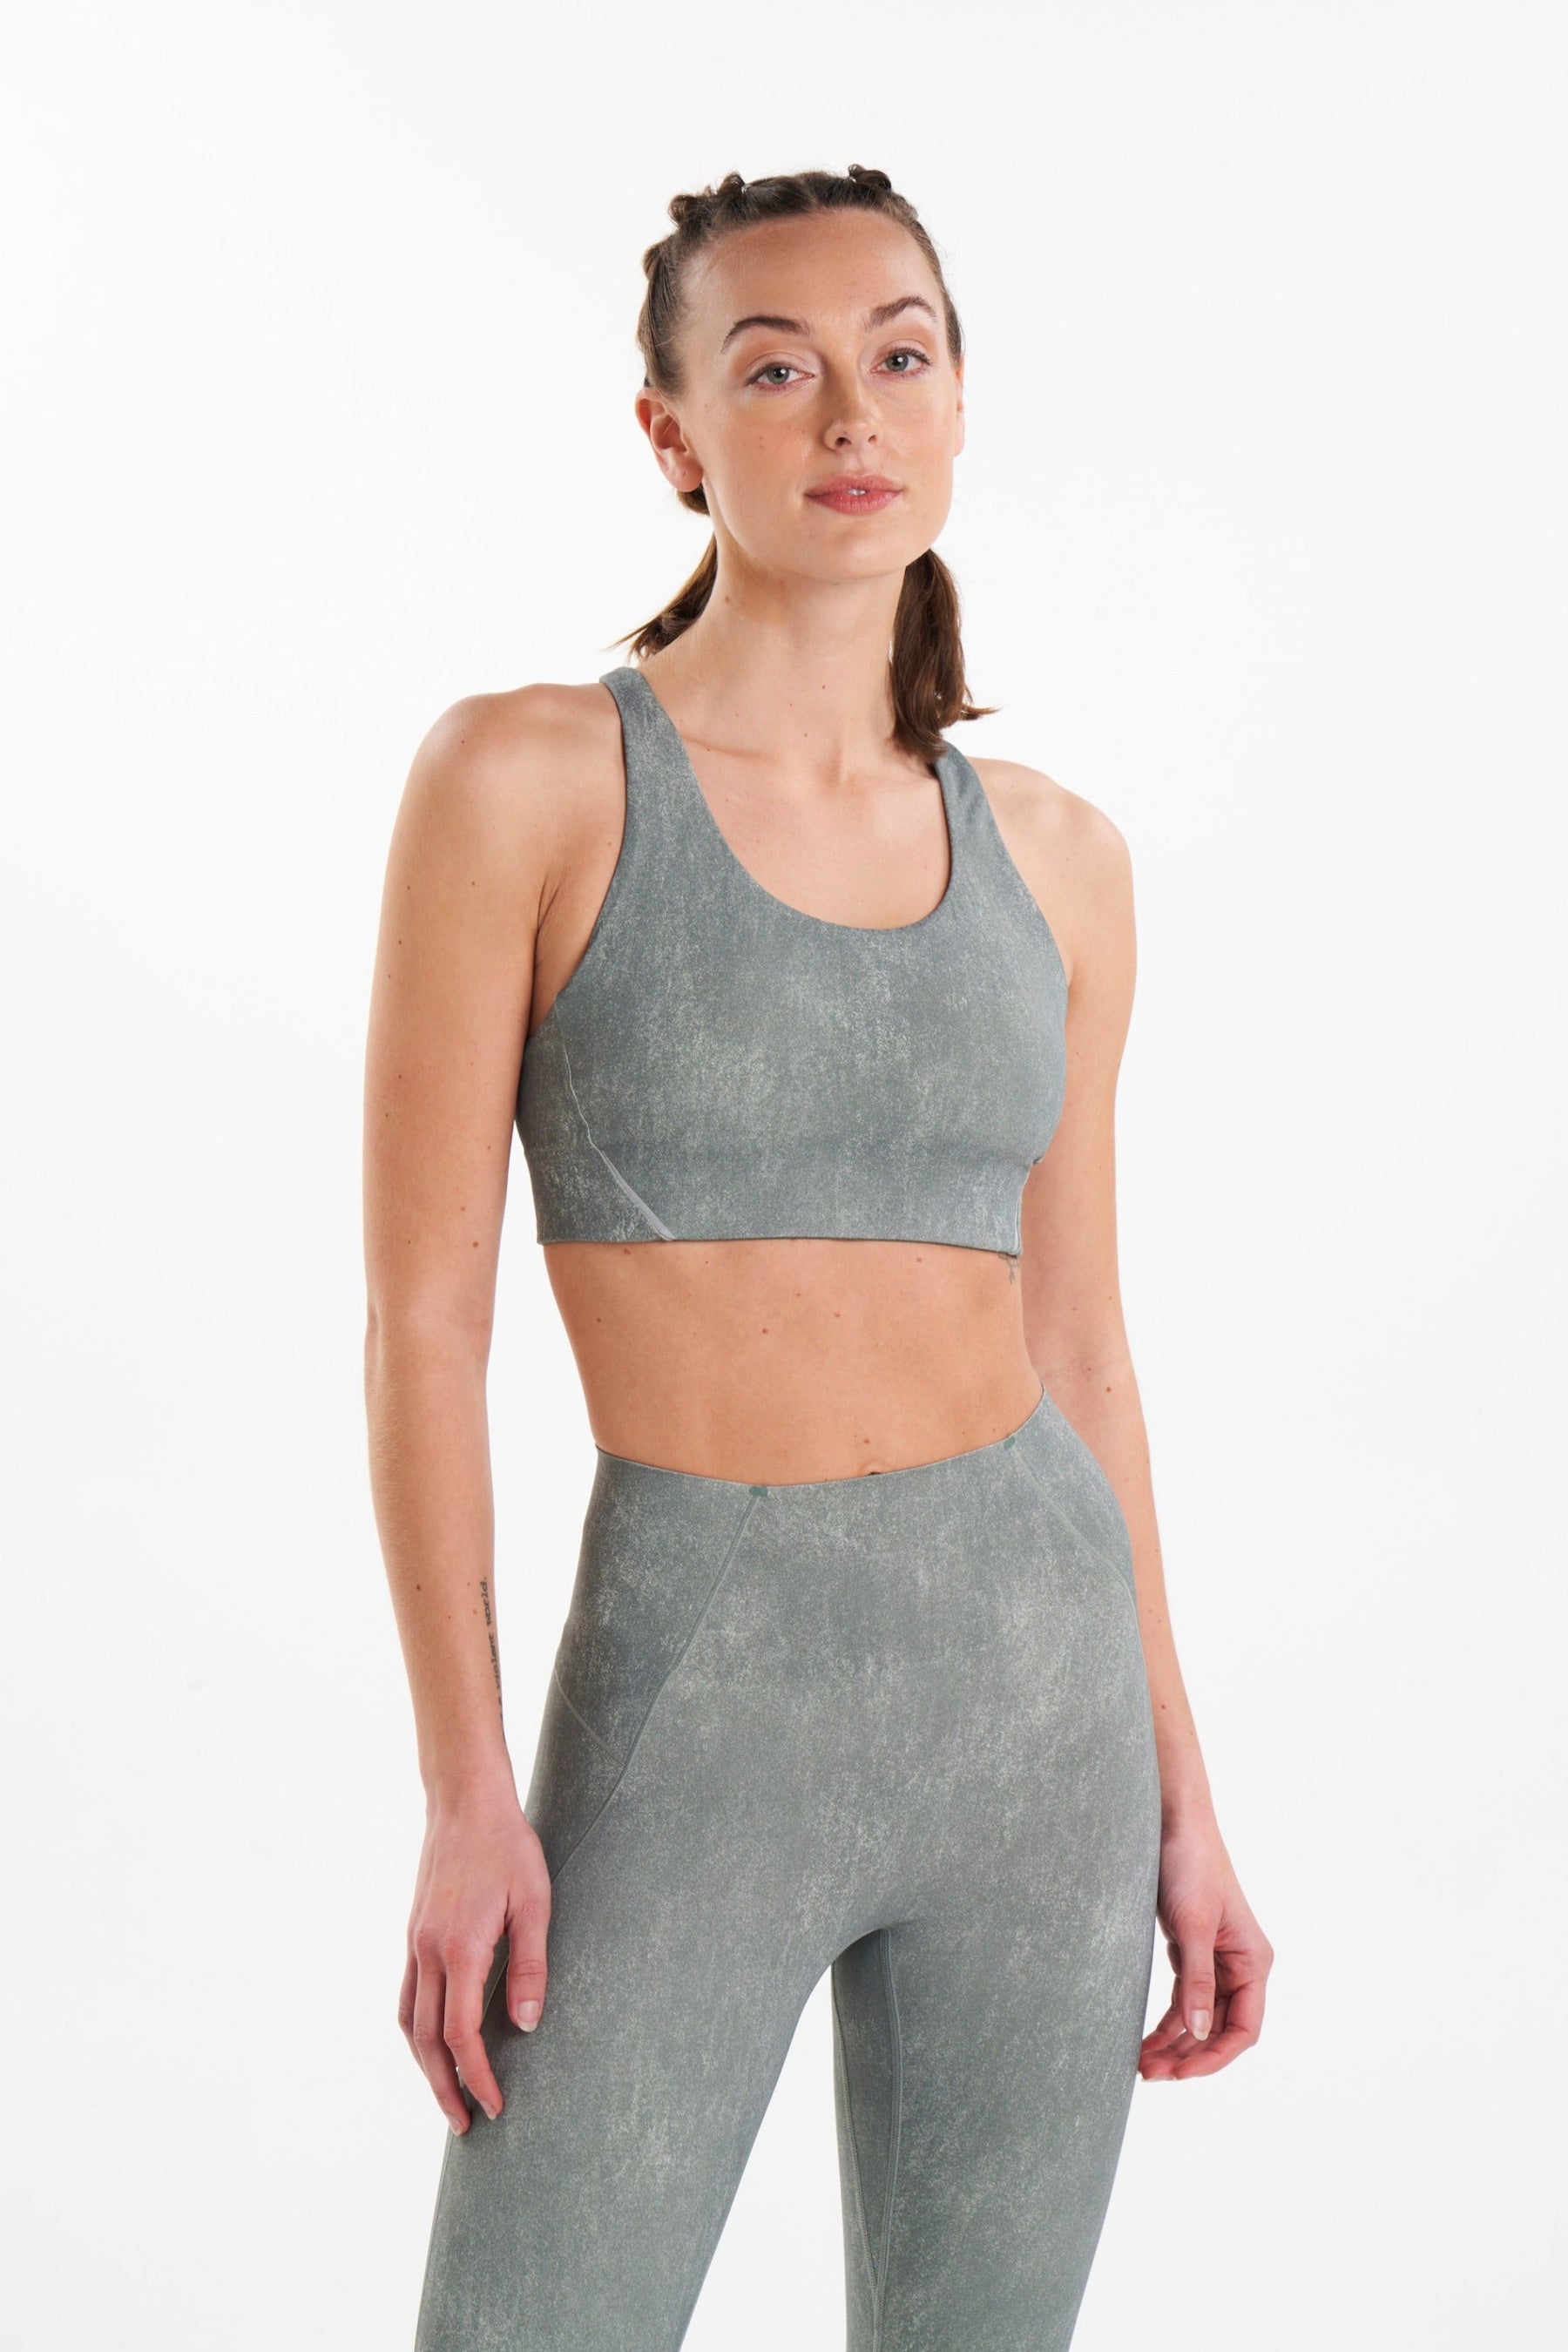 Breathable sustainable sports bra in color weathered fern (sage/grey)